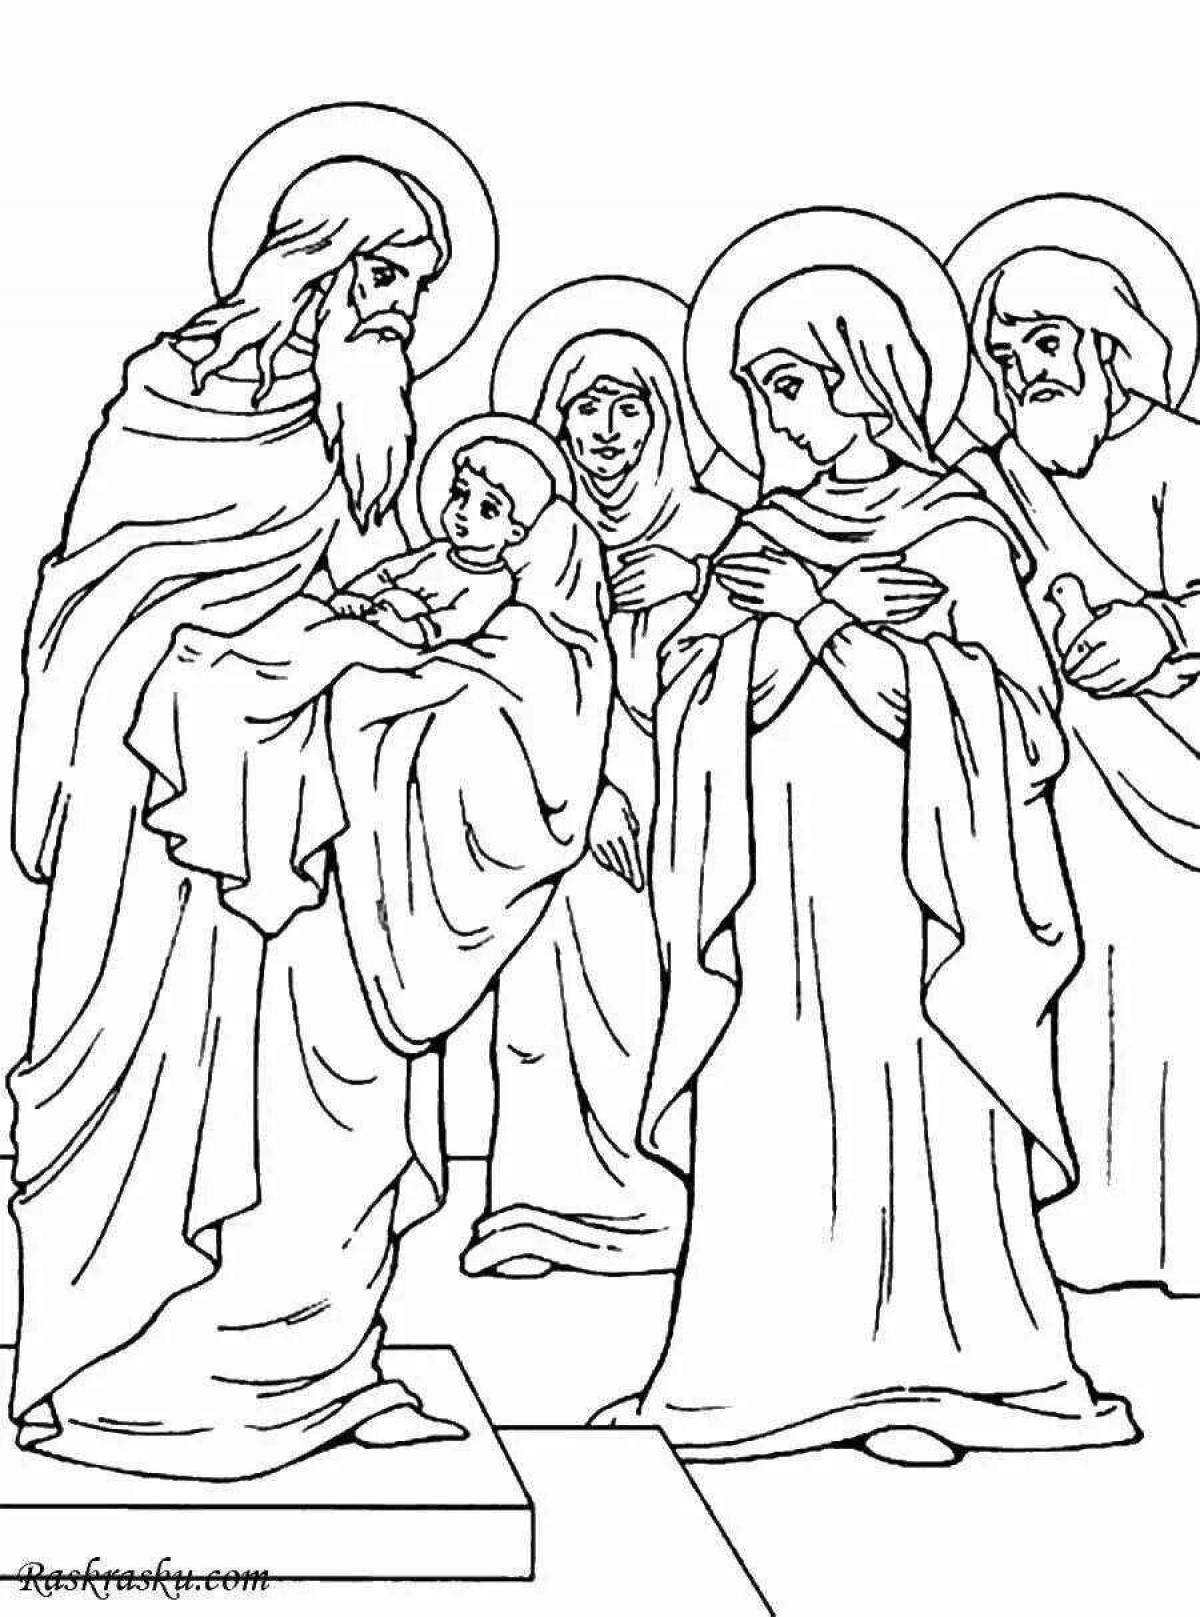 Large baptism coloring book